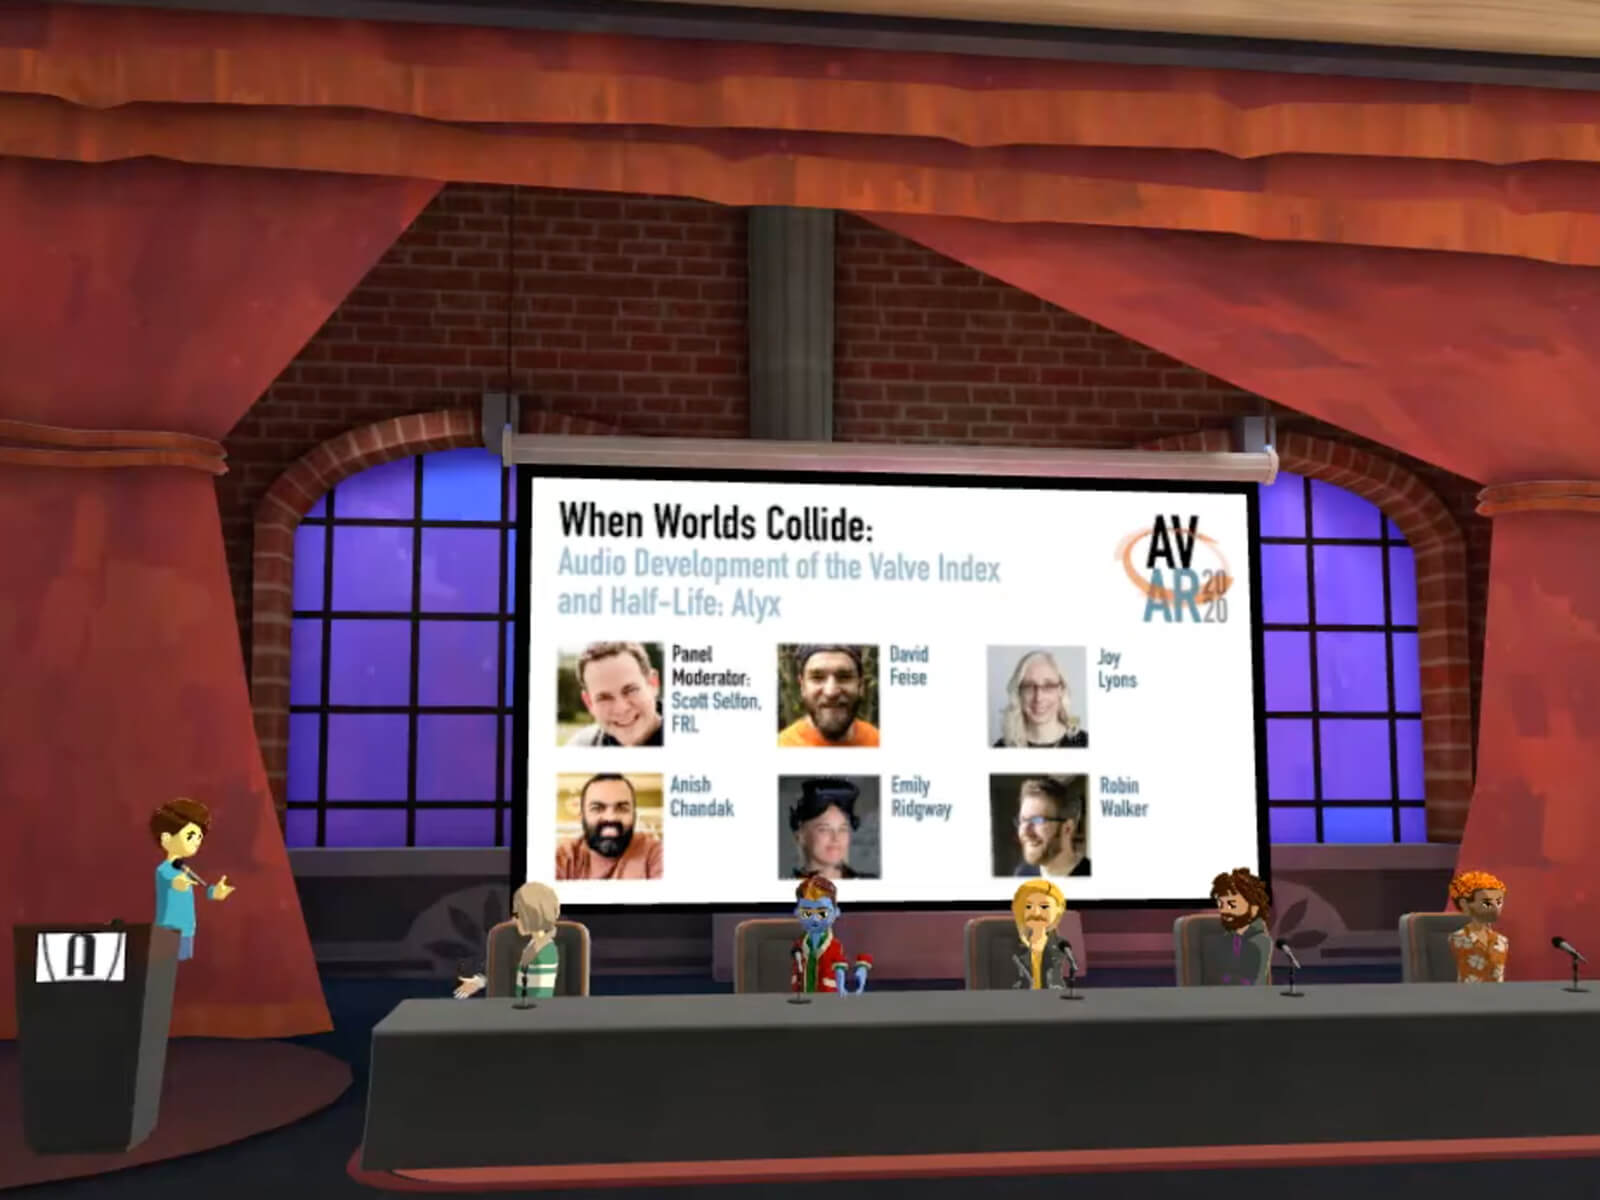 VR avatars of Valve audio designers sit for a panel discussion in a virtual conference room.